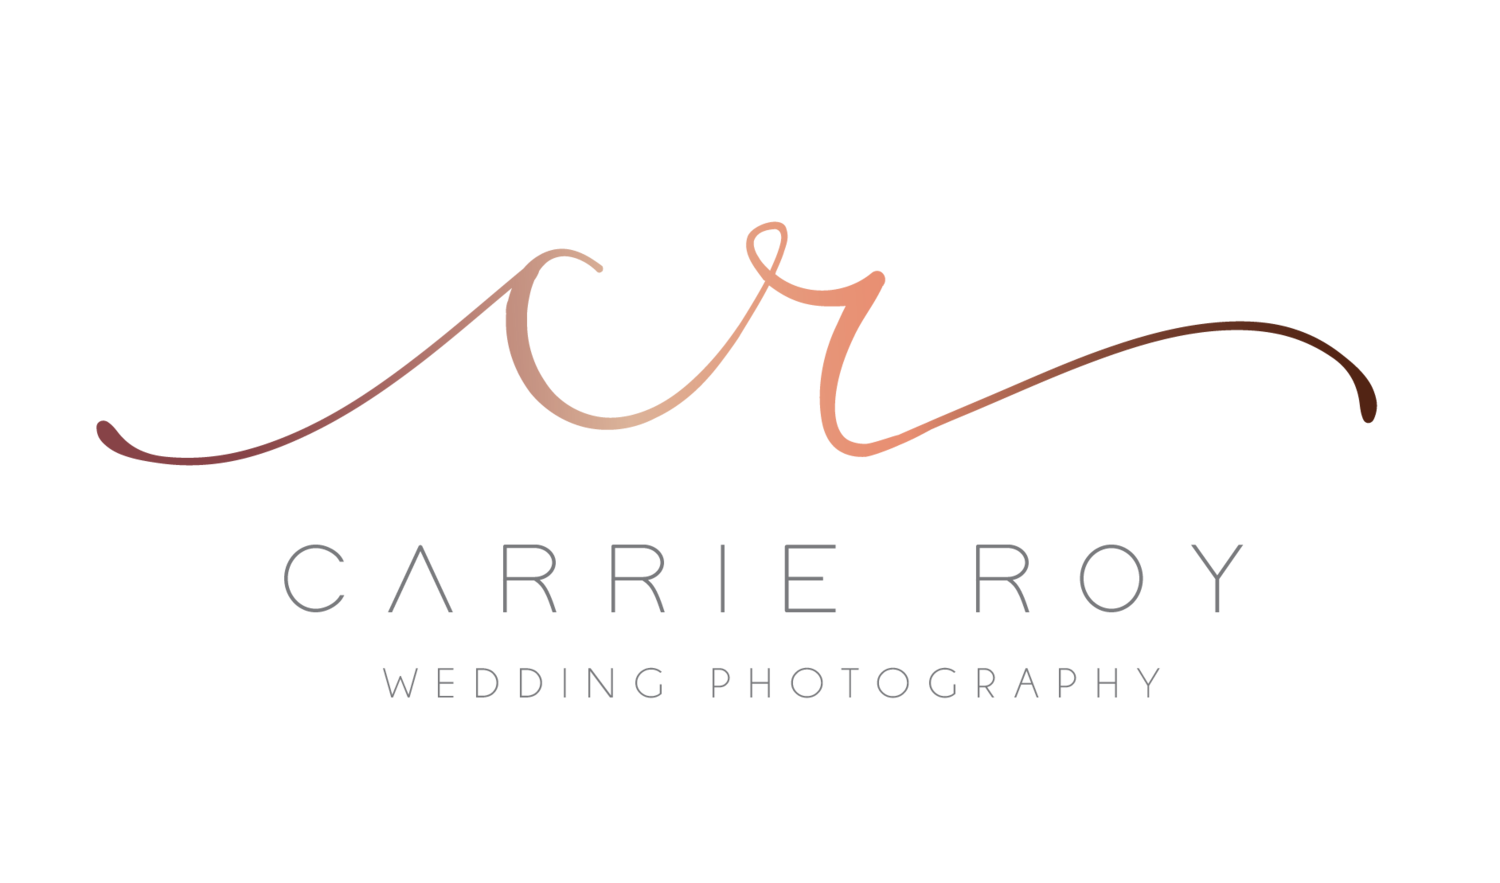 Carrie Roy Wedding Photography